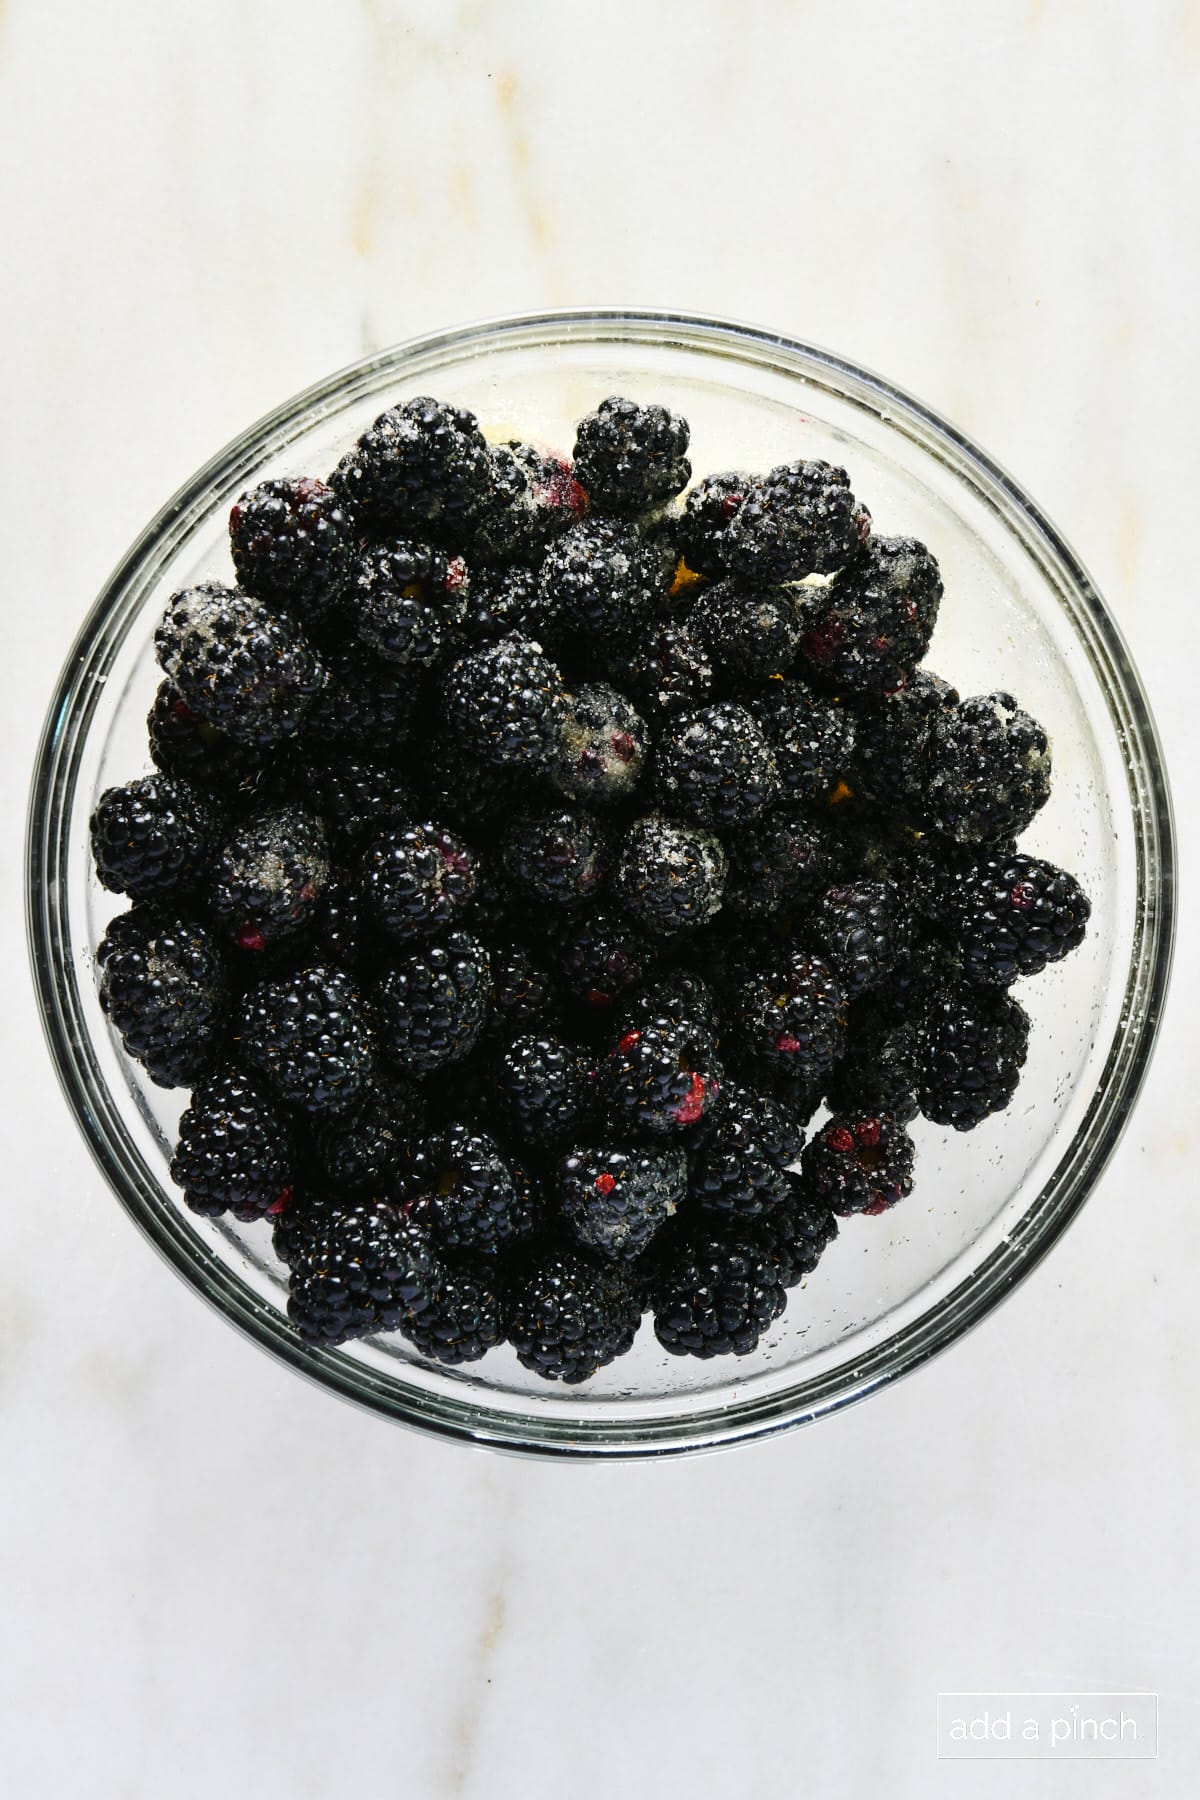 Sugared blackberries in a glass bowl